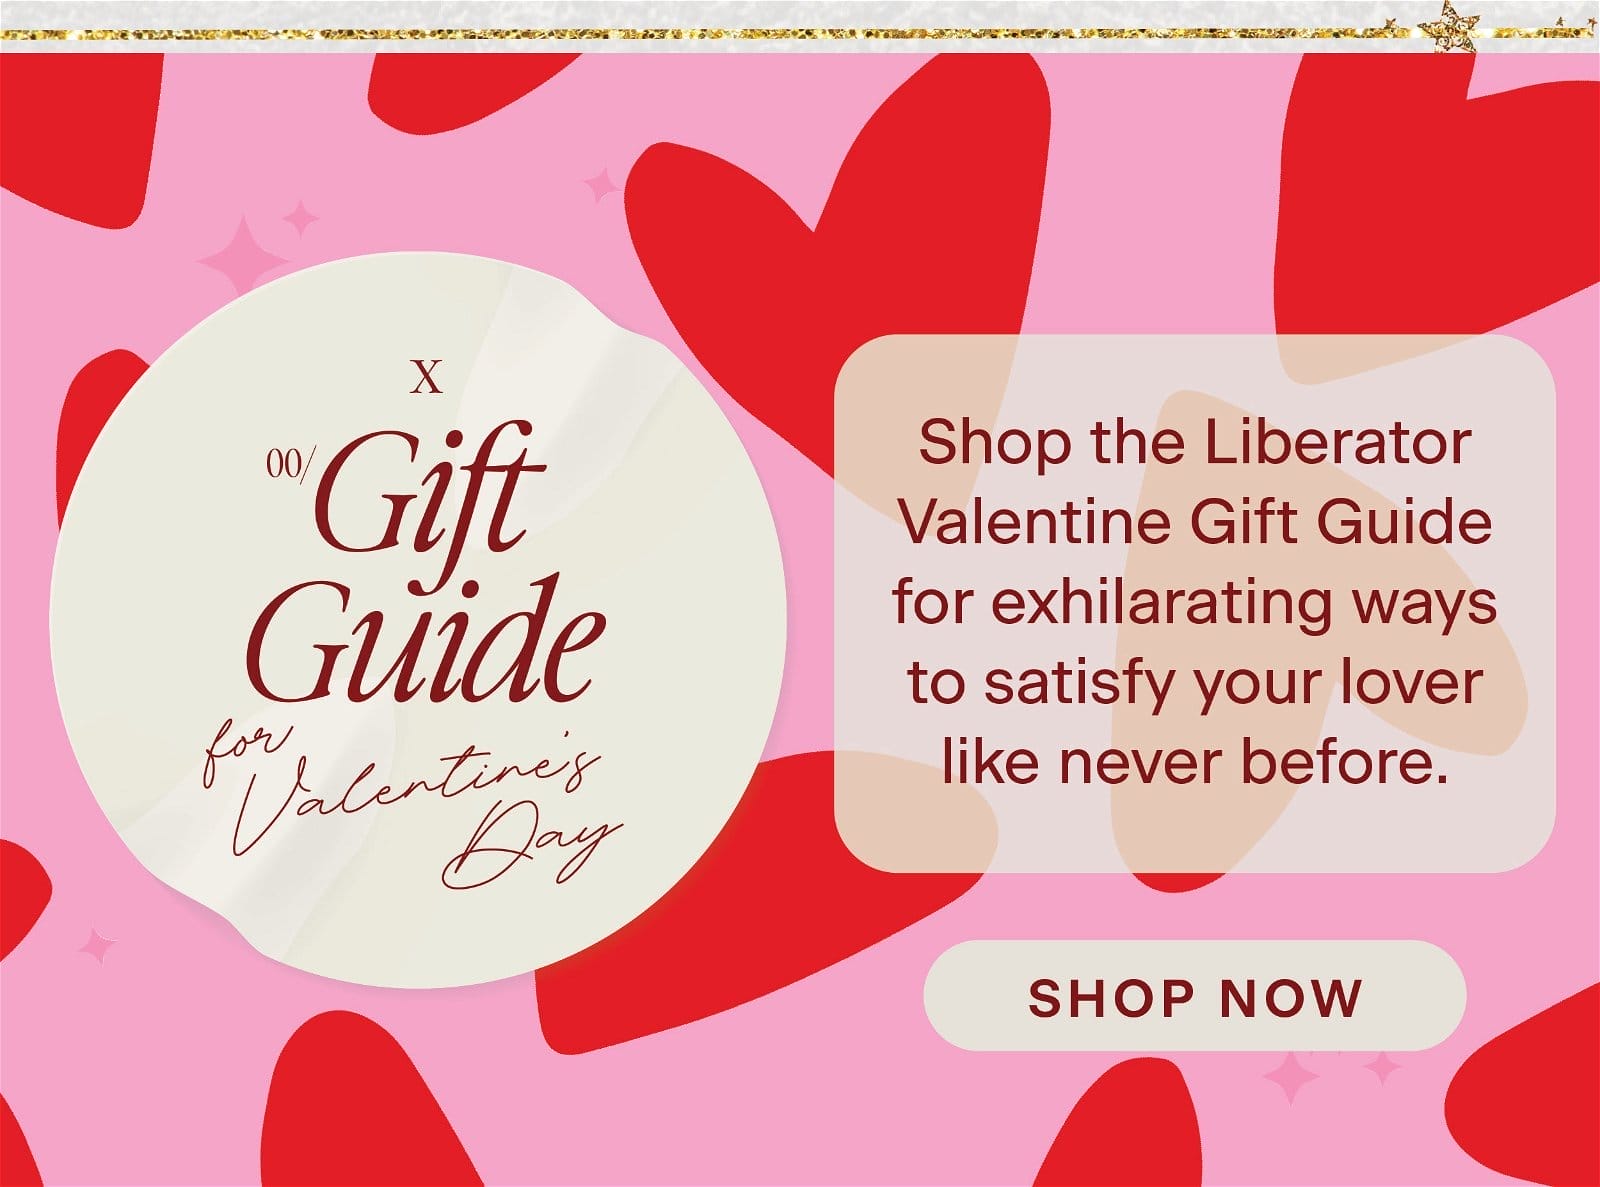 Shop the Liberator Valentine Gift Guide for inspired ways to deepen your carnal connection, enhance intimacy, and satisfy your love more than ever before